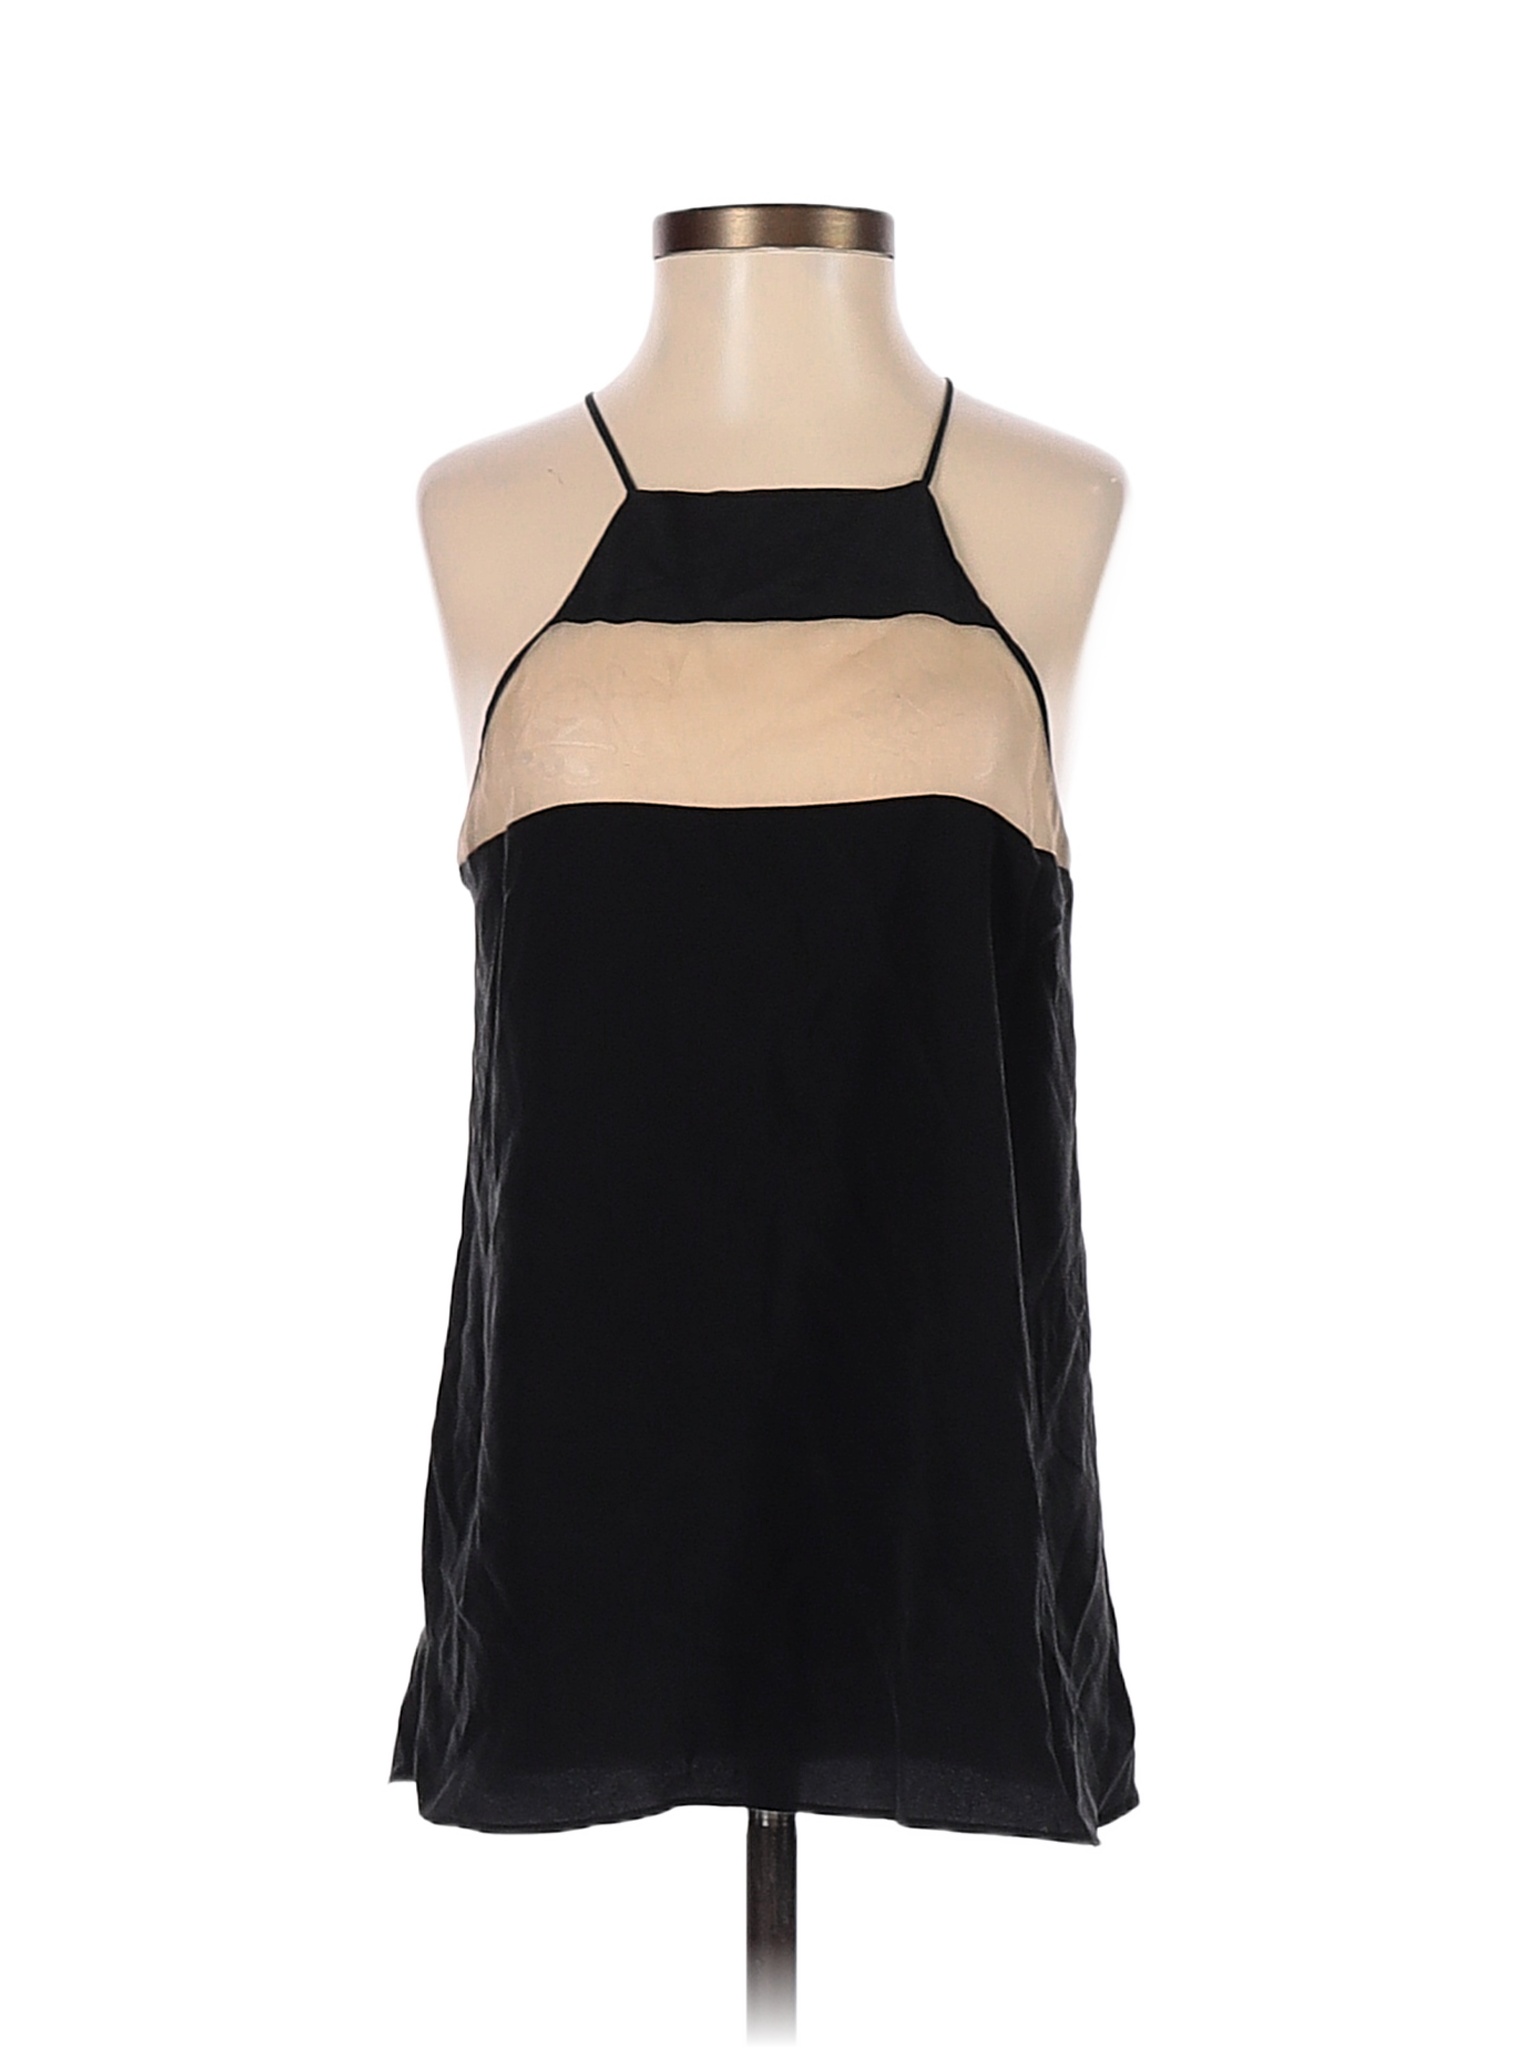 Women's The Drop Camisoles − Sale: at $37.90+